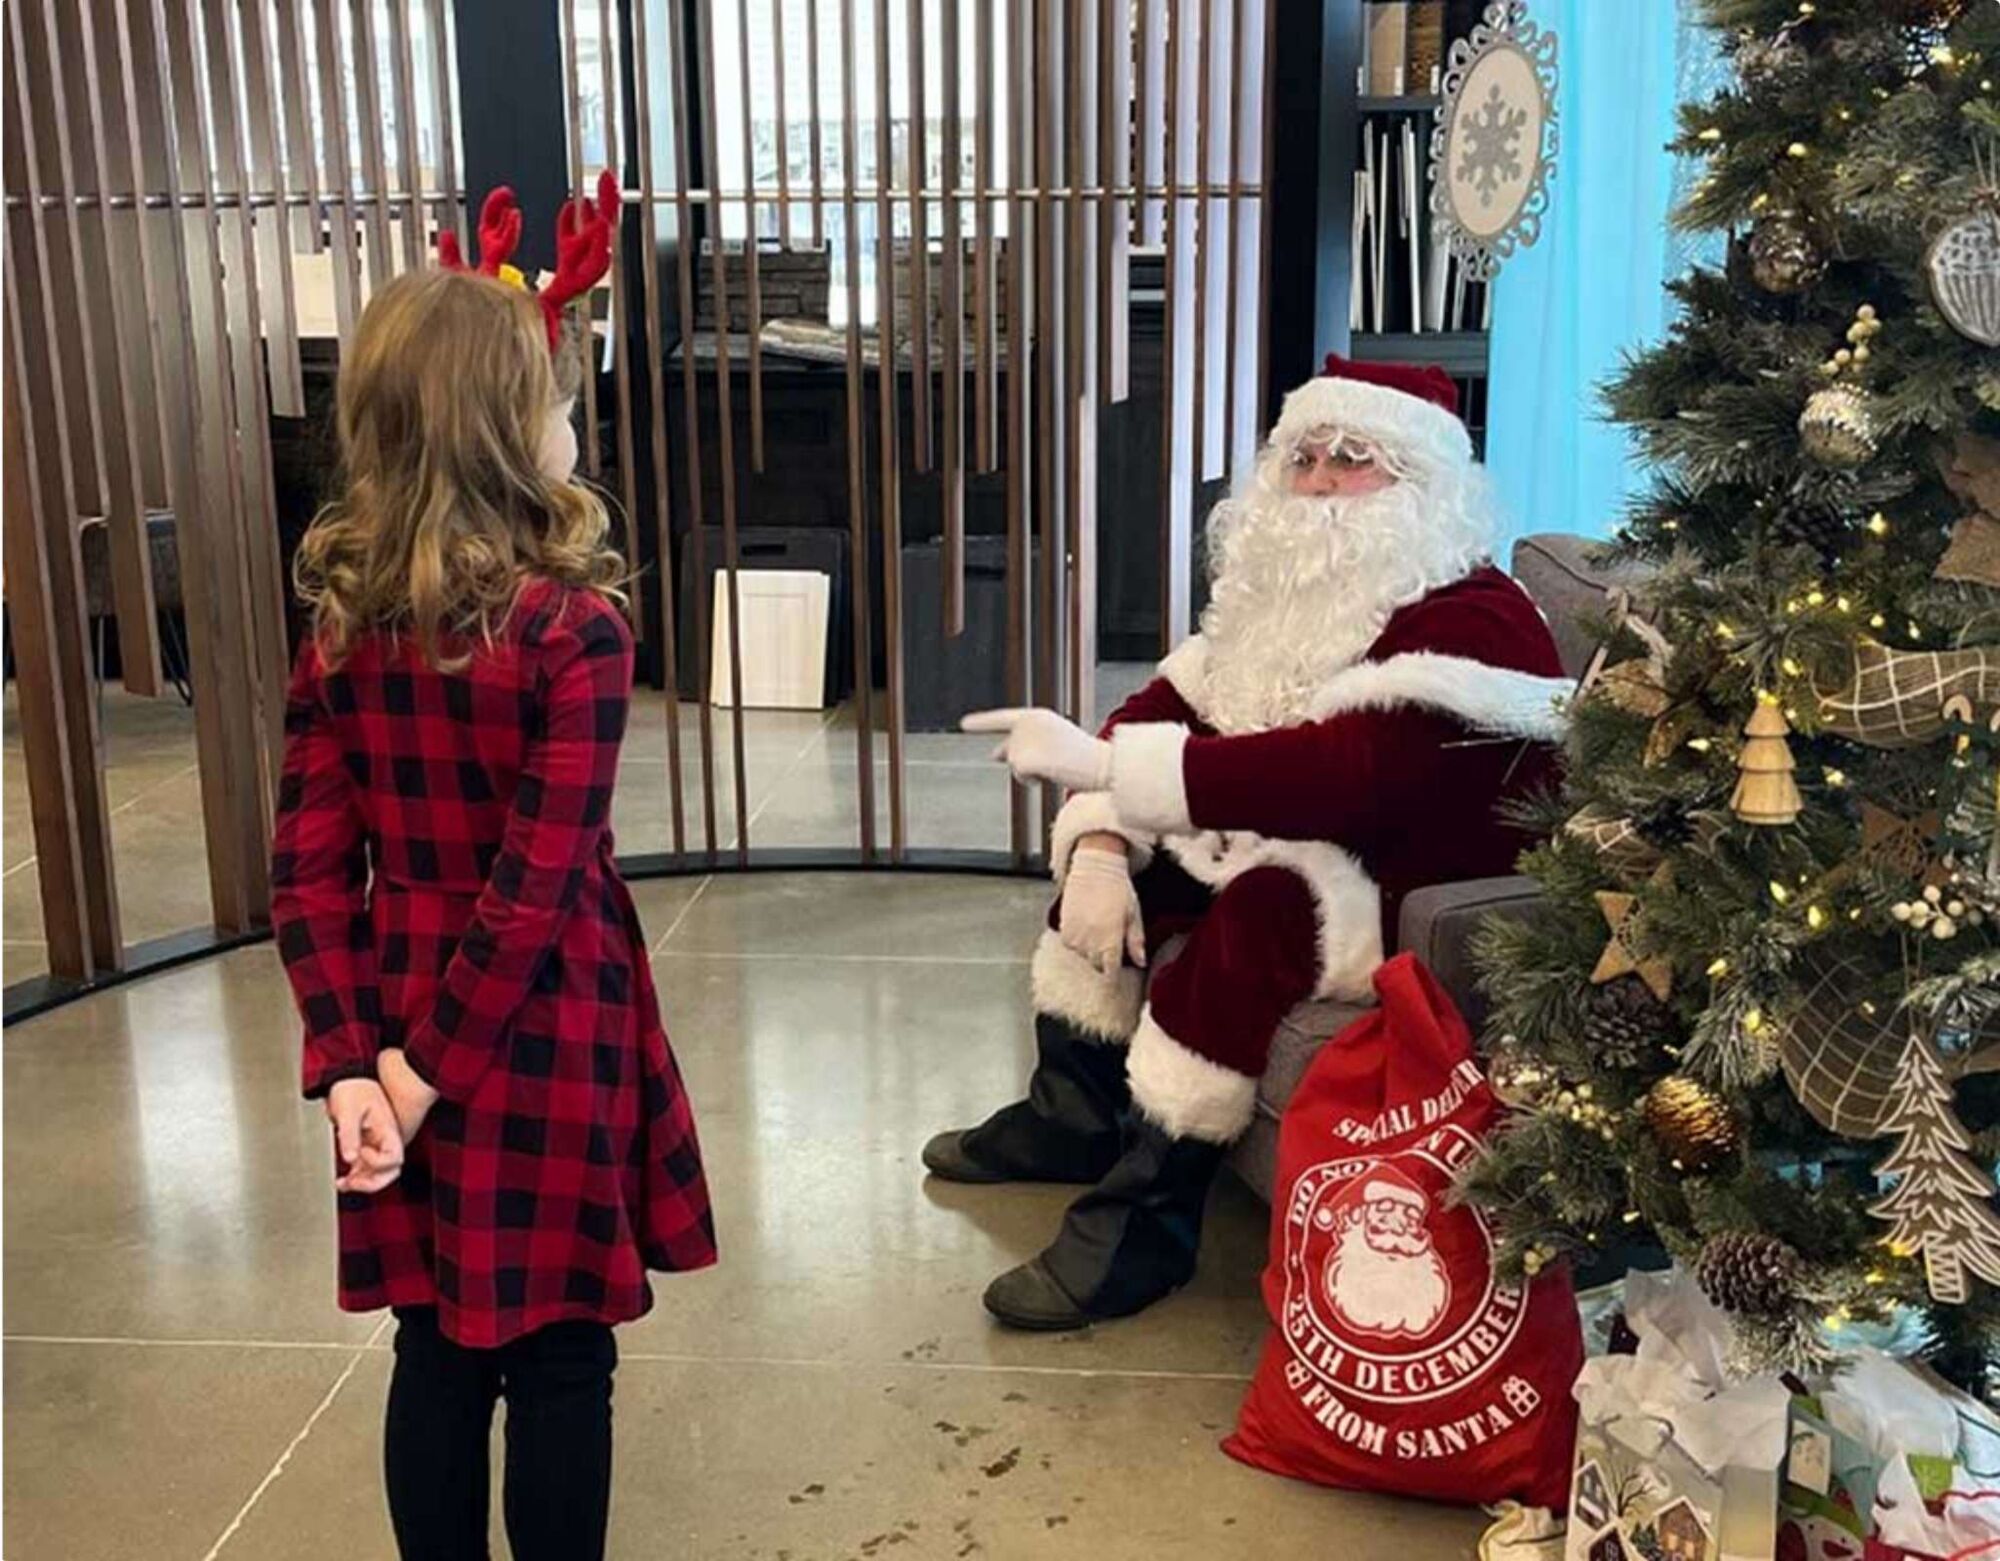 A child talking to Santa in front of a Christmas tree.